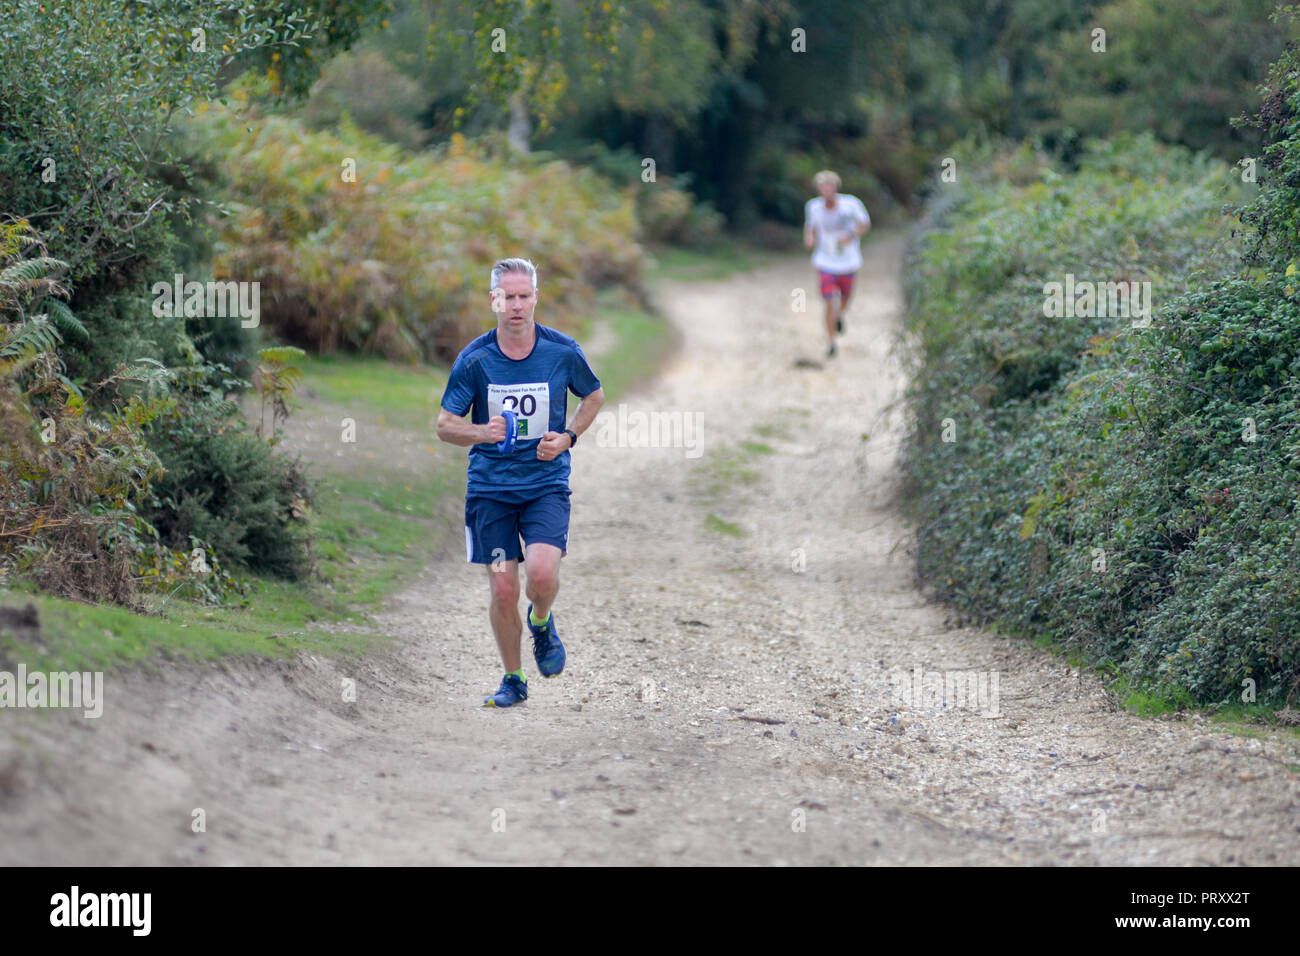 Runners in an amateur cross country running race, New Forest, Hampshire, UK Stock Photo